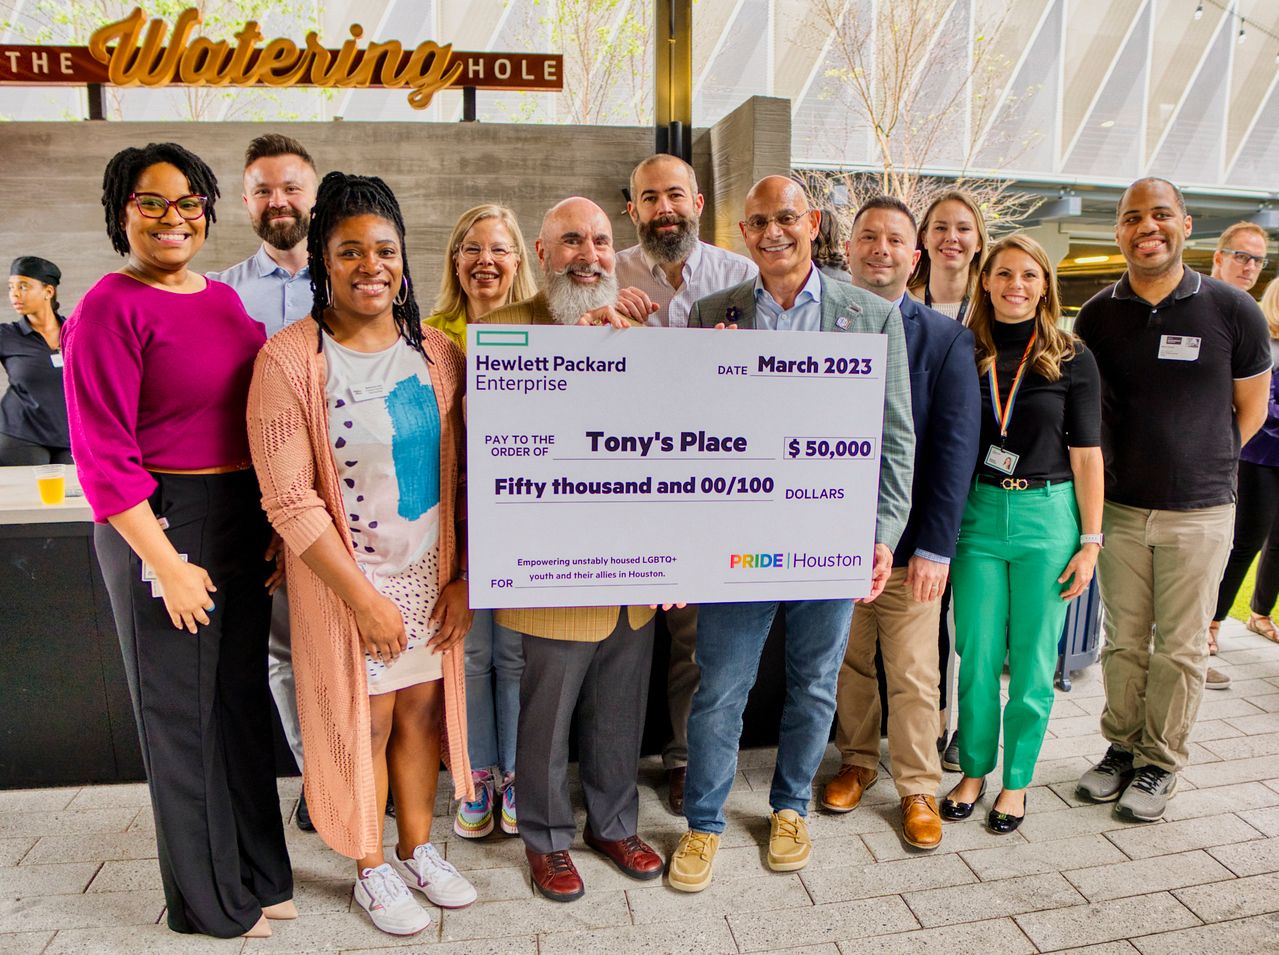 HPE granted $50,000 to Tony’s Place, a Houston nonprofit offering a safe space for LGBTQ+ youth facing homelessness and other crises.